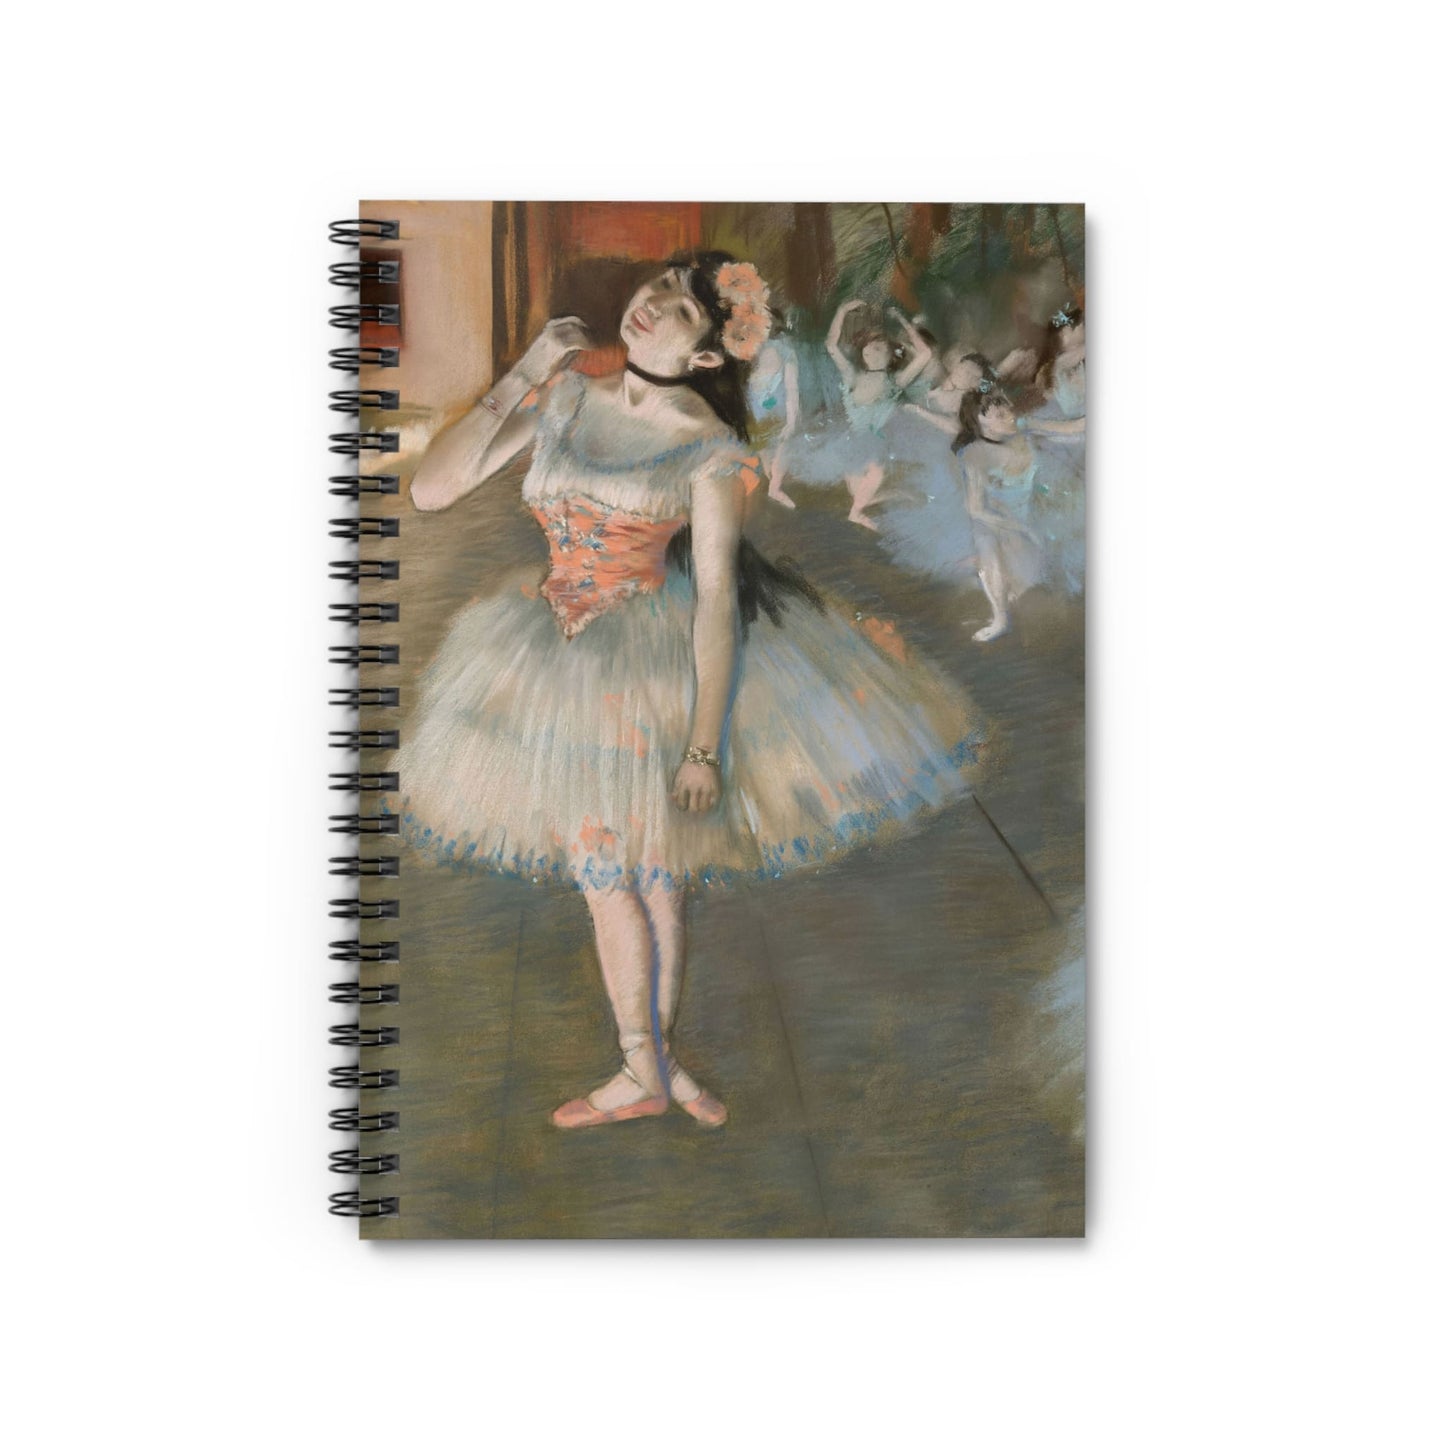 Ballerina Painting Notebook with Edgar Degas cover, perfect for journaling and planning, showcasing famous ballerina paintings by Edgar Degas.